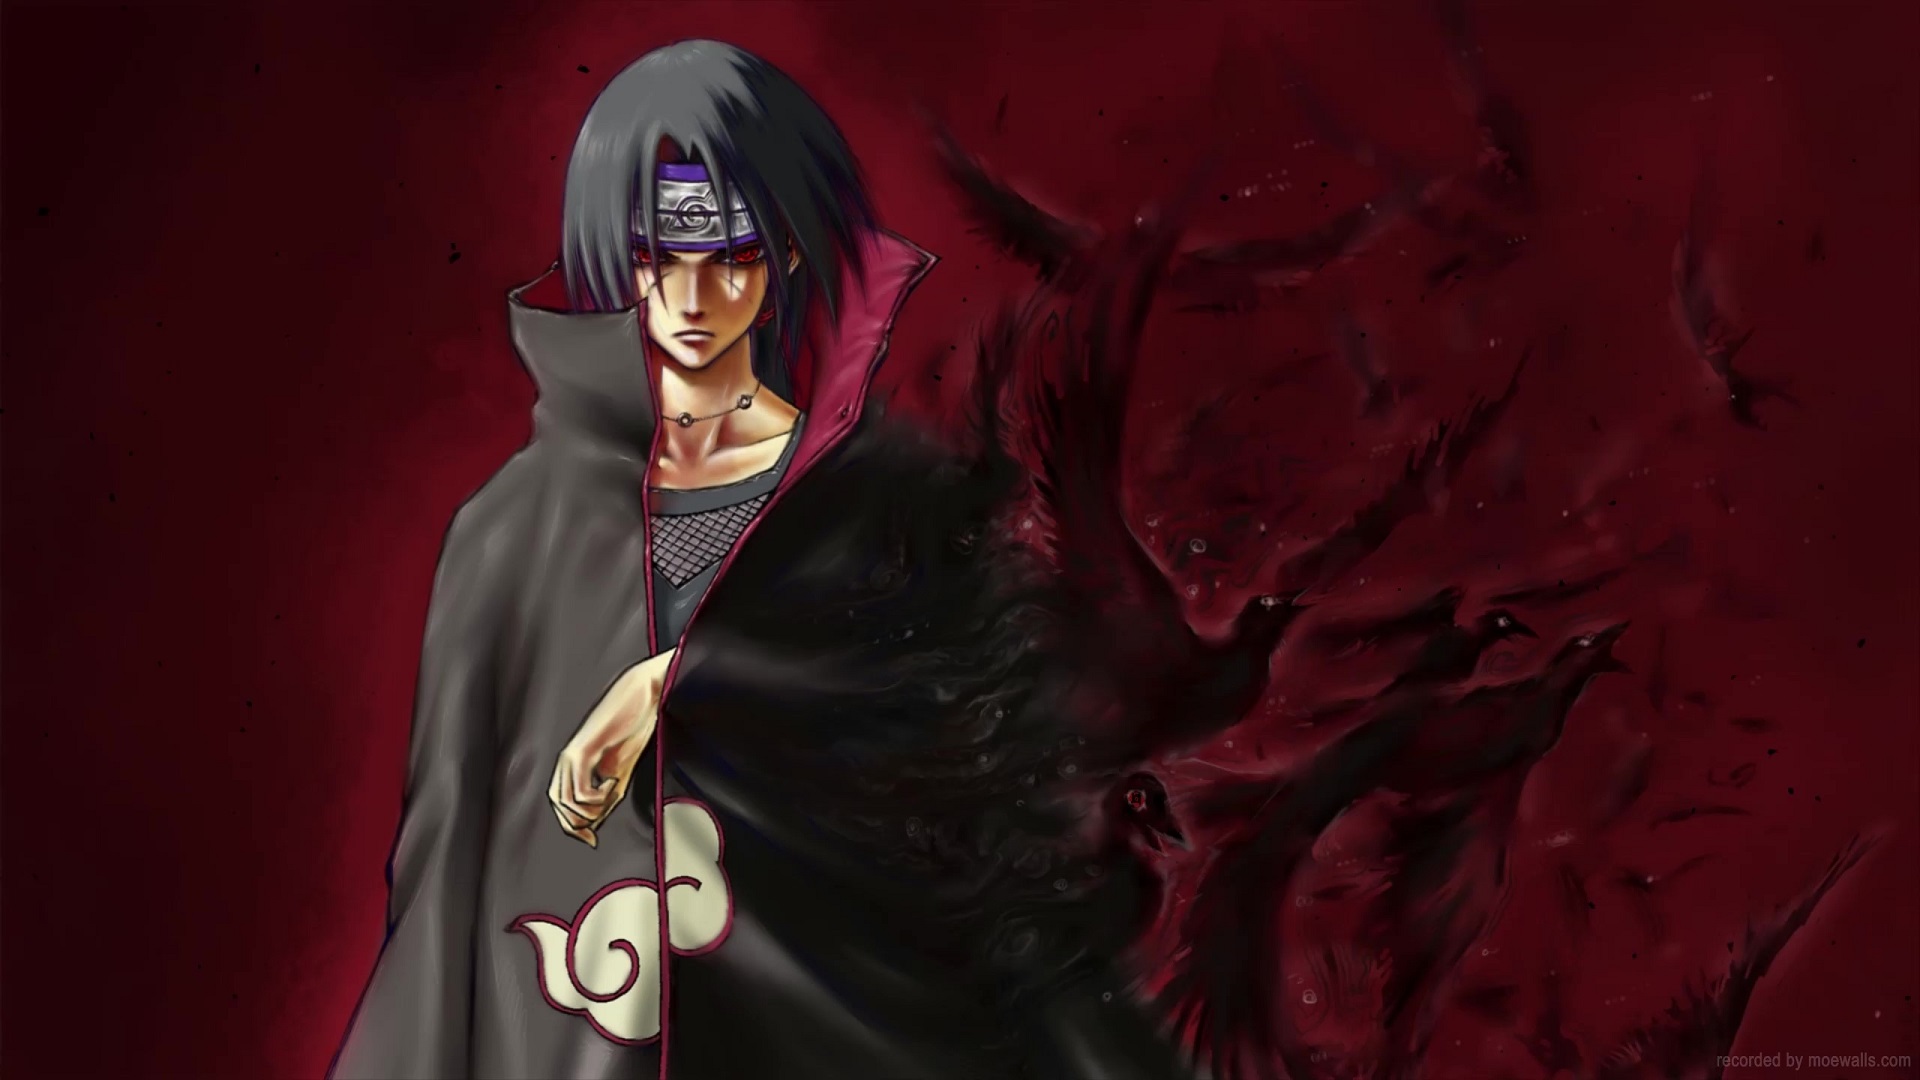 15 Obito Uchiha Live Wallpapers, Animated Wallpapers - MoeWalls